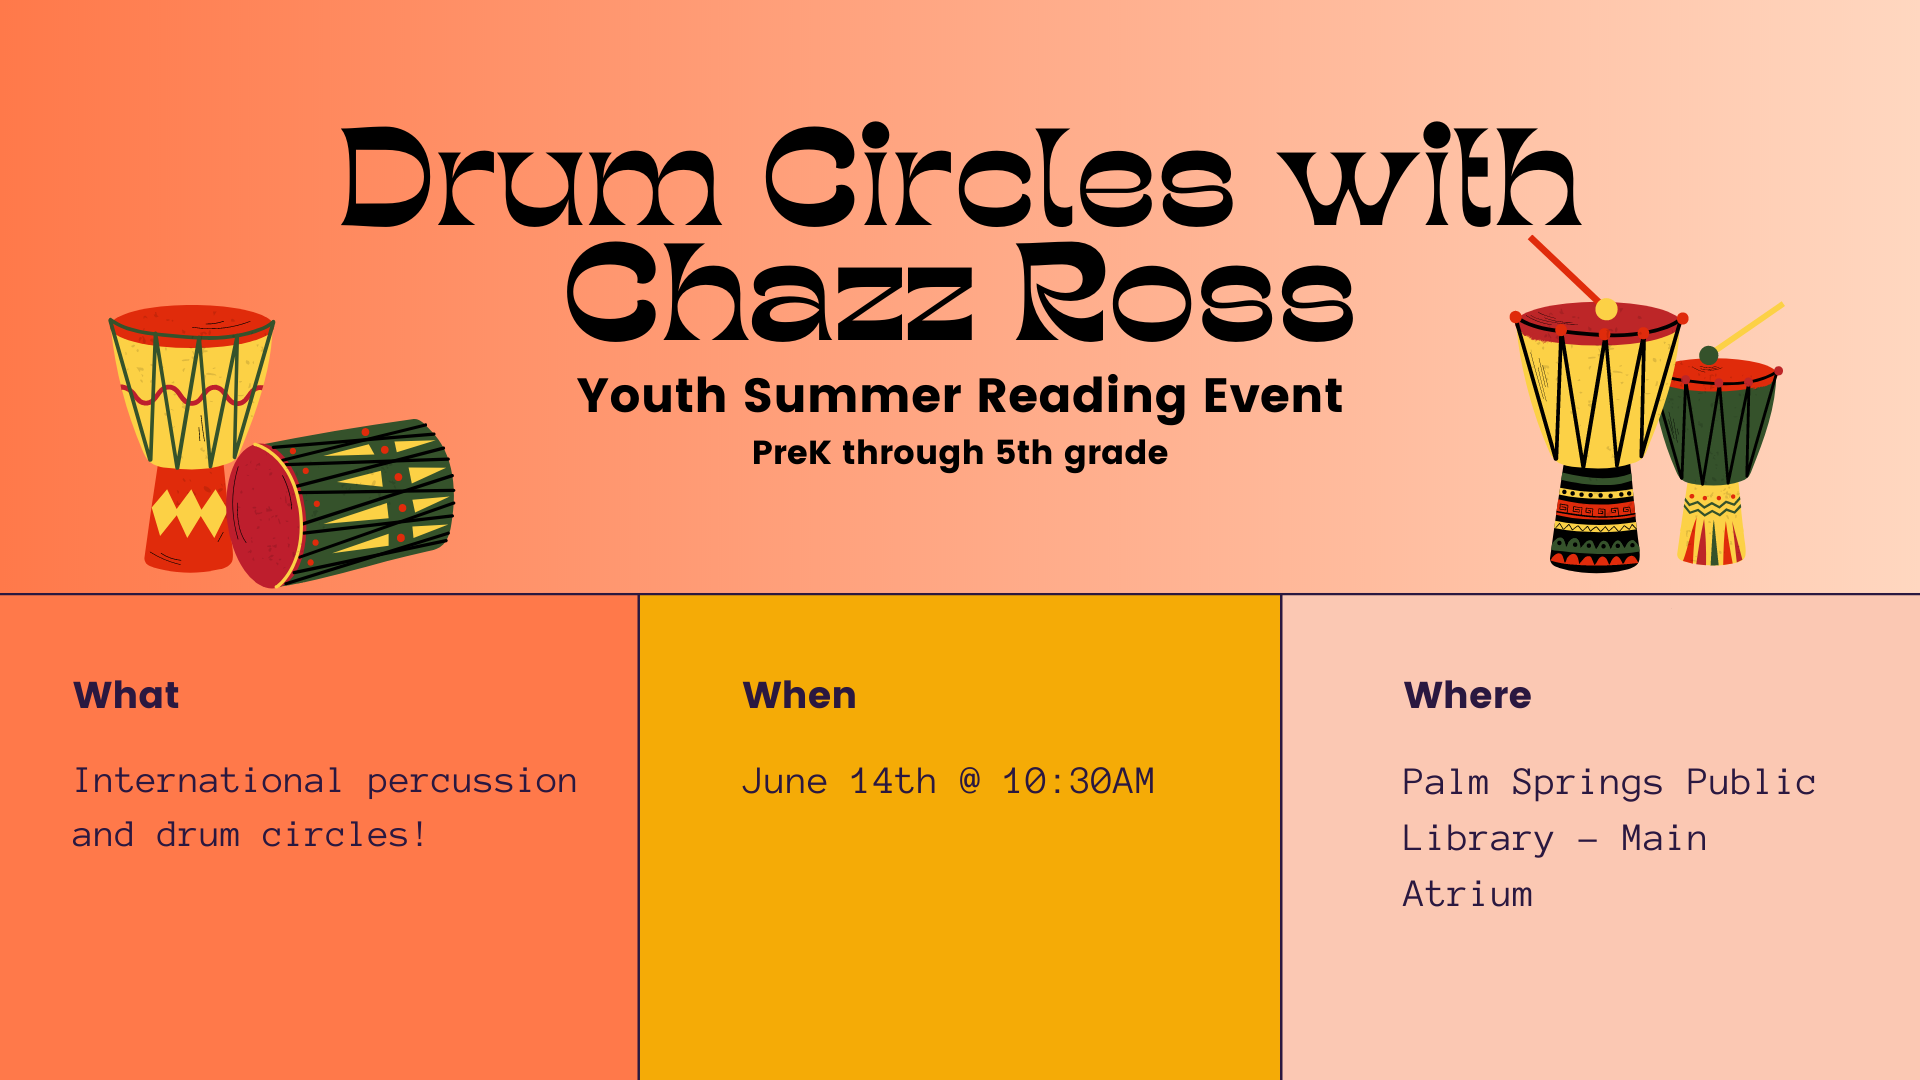 Youth Event: Drum Circle with Cazz Ross June 14 10:30 AM   